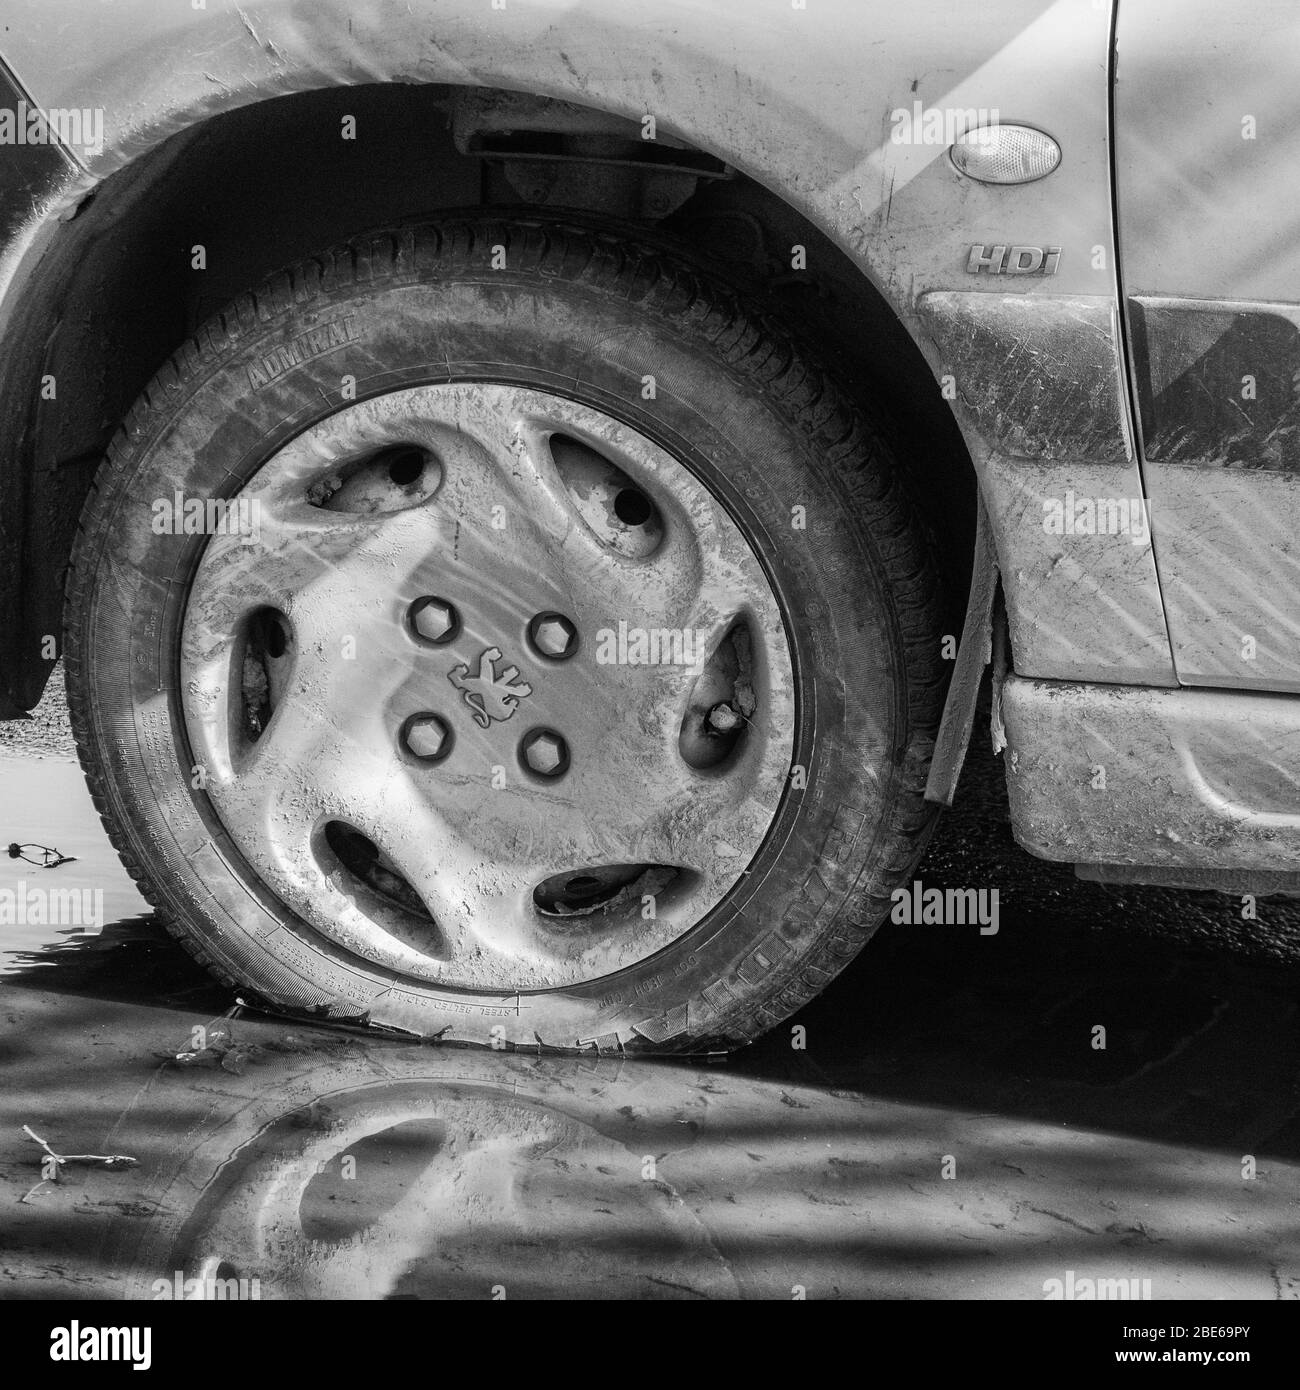 Gritty black & white of wheel / tyre and wheel arch of a Peugeot car, with Peugeot marquelion logo visible on hubcap. HDi but precise model unknown. Stock Photo